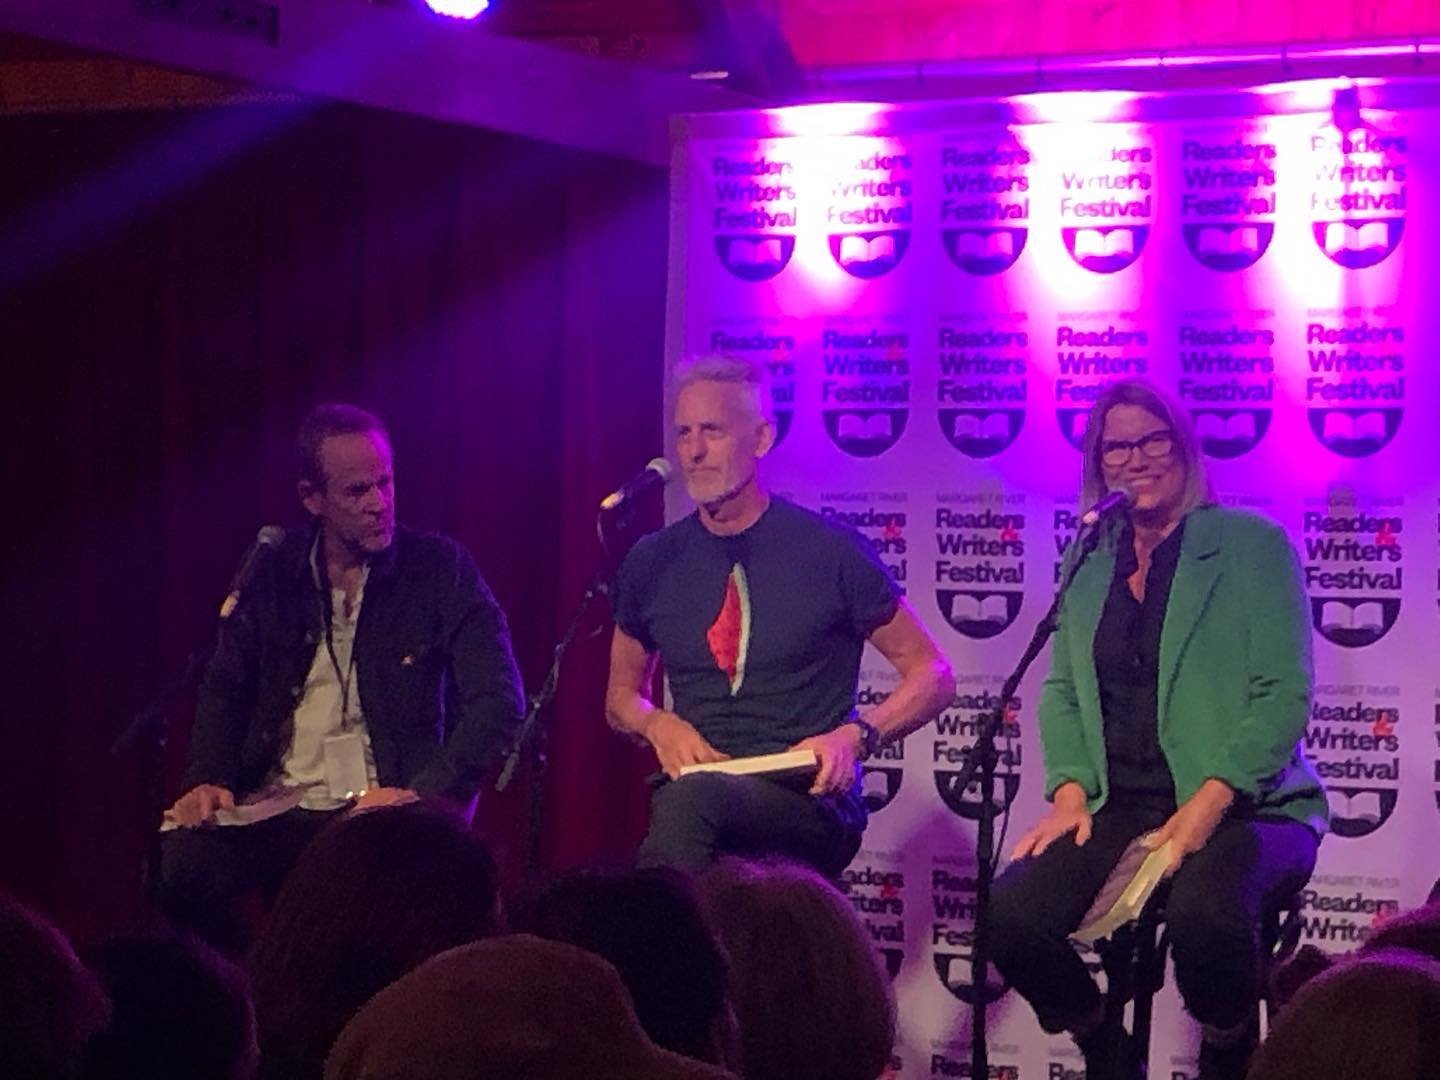 An absolute honour to share the stage with these two legends @gillianoshaughnessy and @jondoust to talk all things #intoyourarms and Nick Cave. Thank you @mrrwfestival for giving us the opportunity to share our stories and a huge shout out to the sol